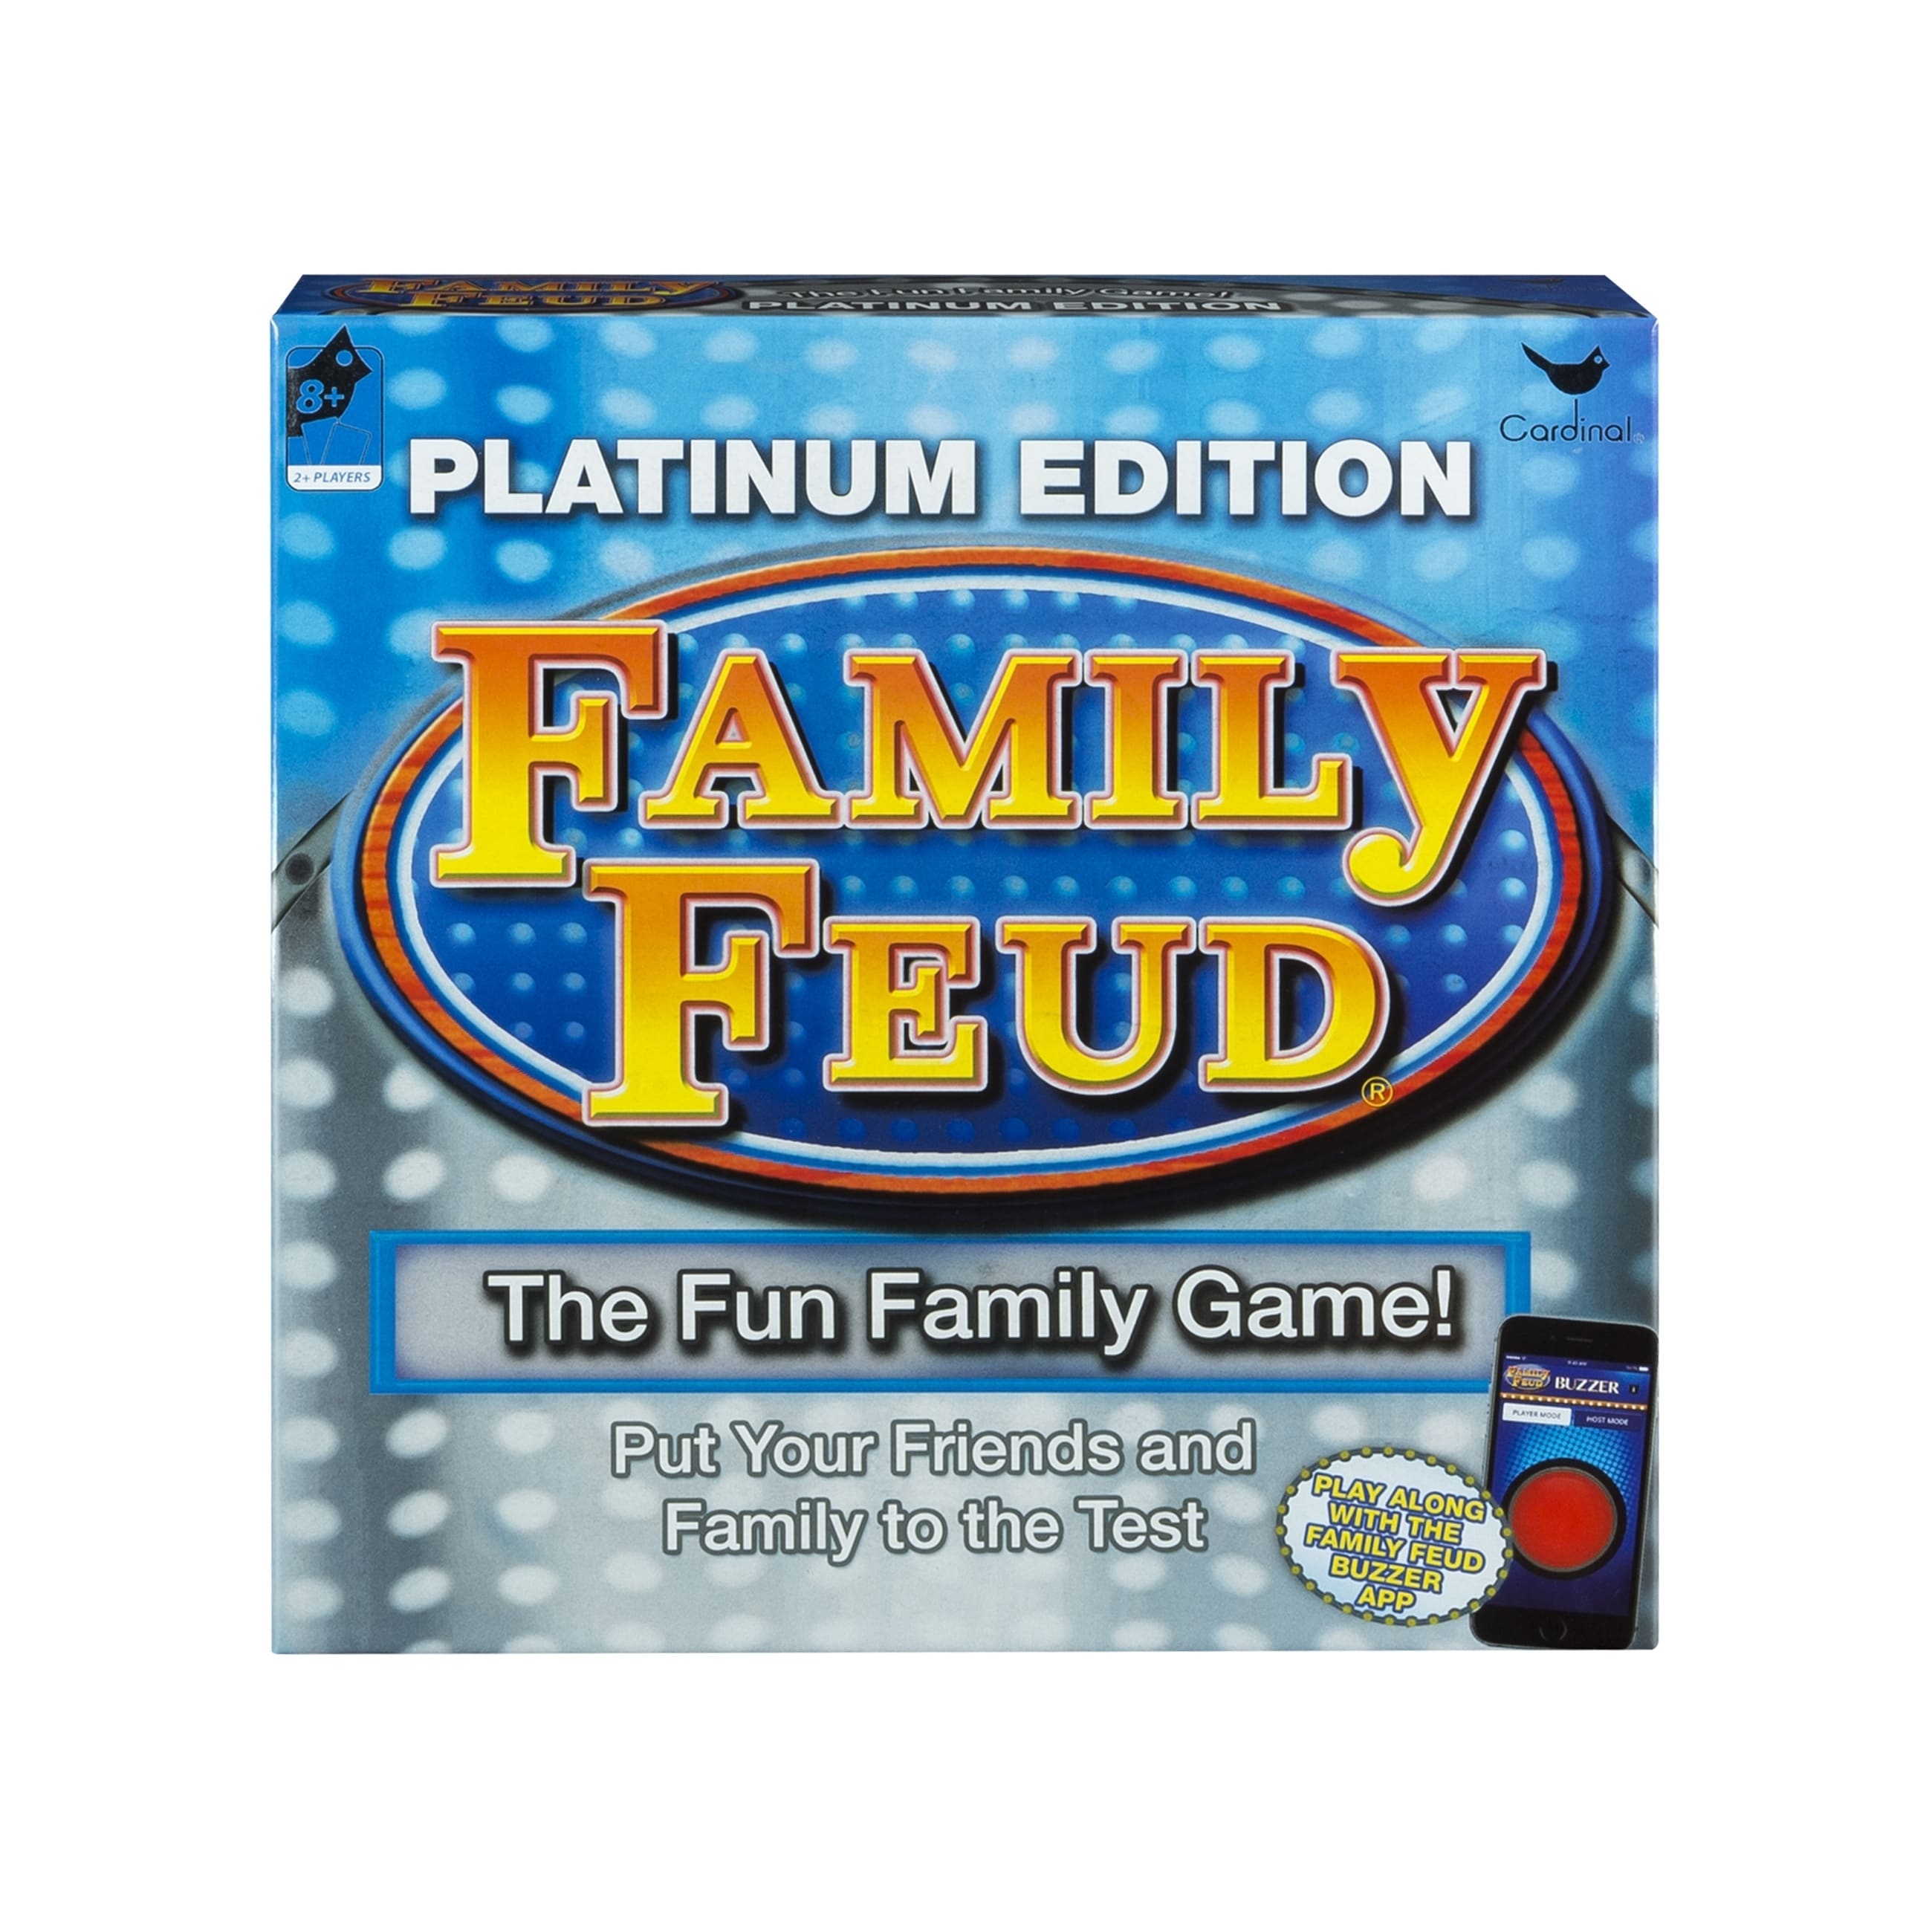 41 Top Photos Family Feud Game App With Friends - Family Feud Answers And Cheat